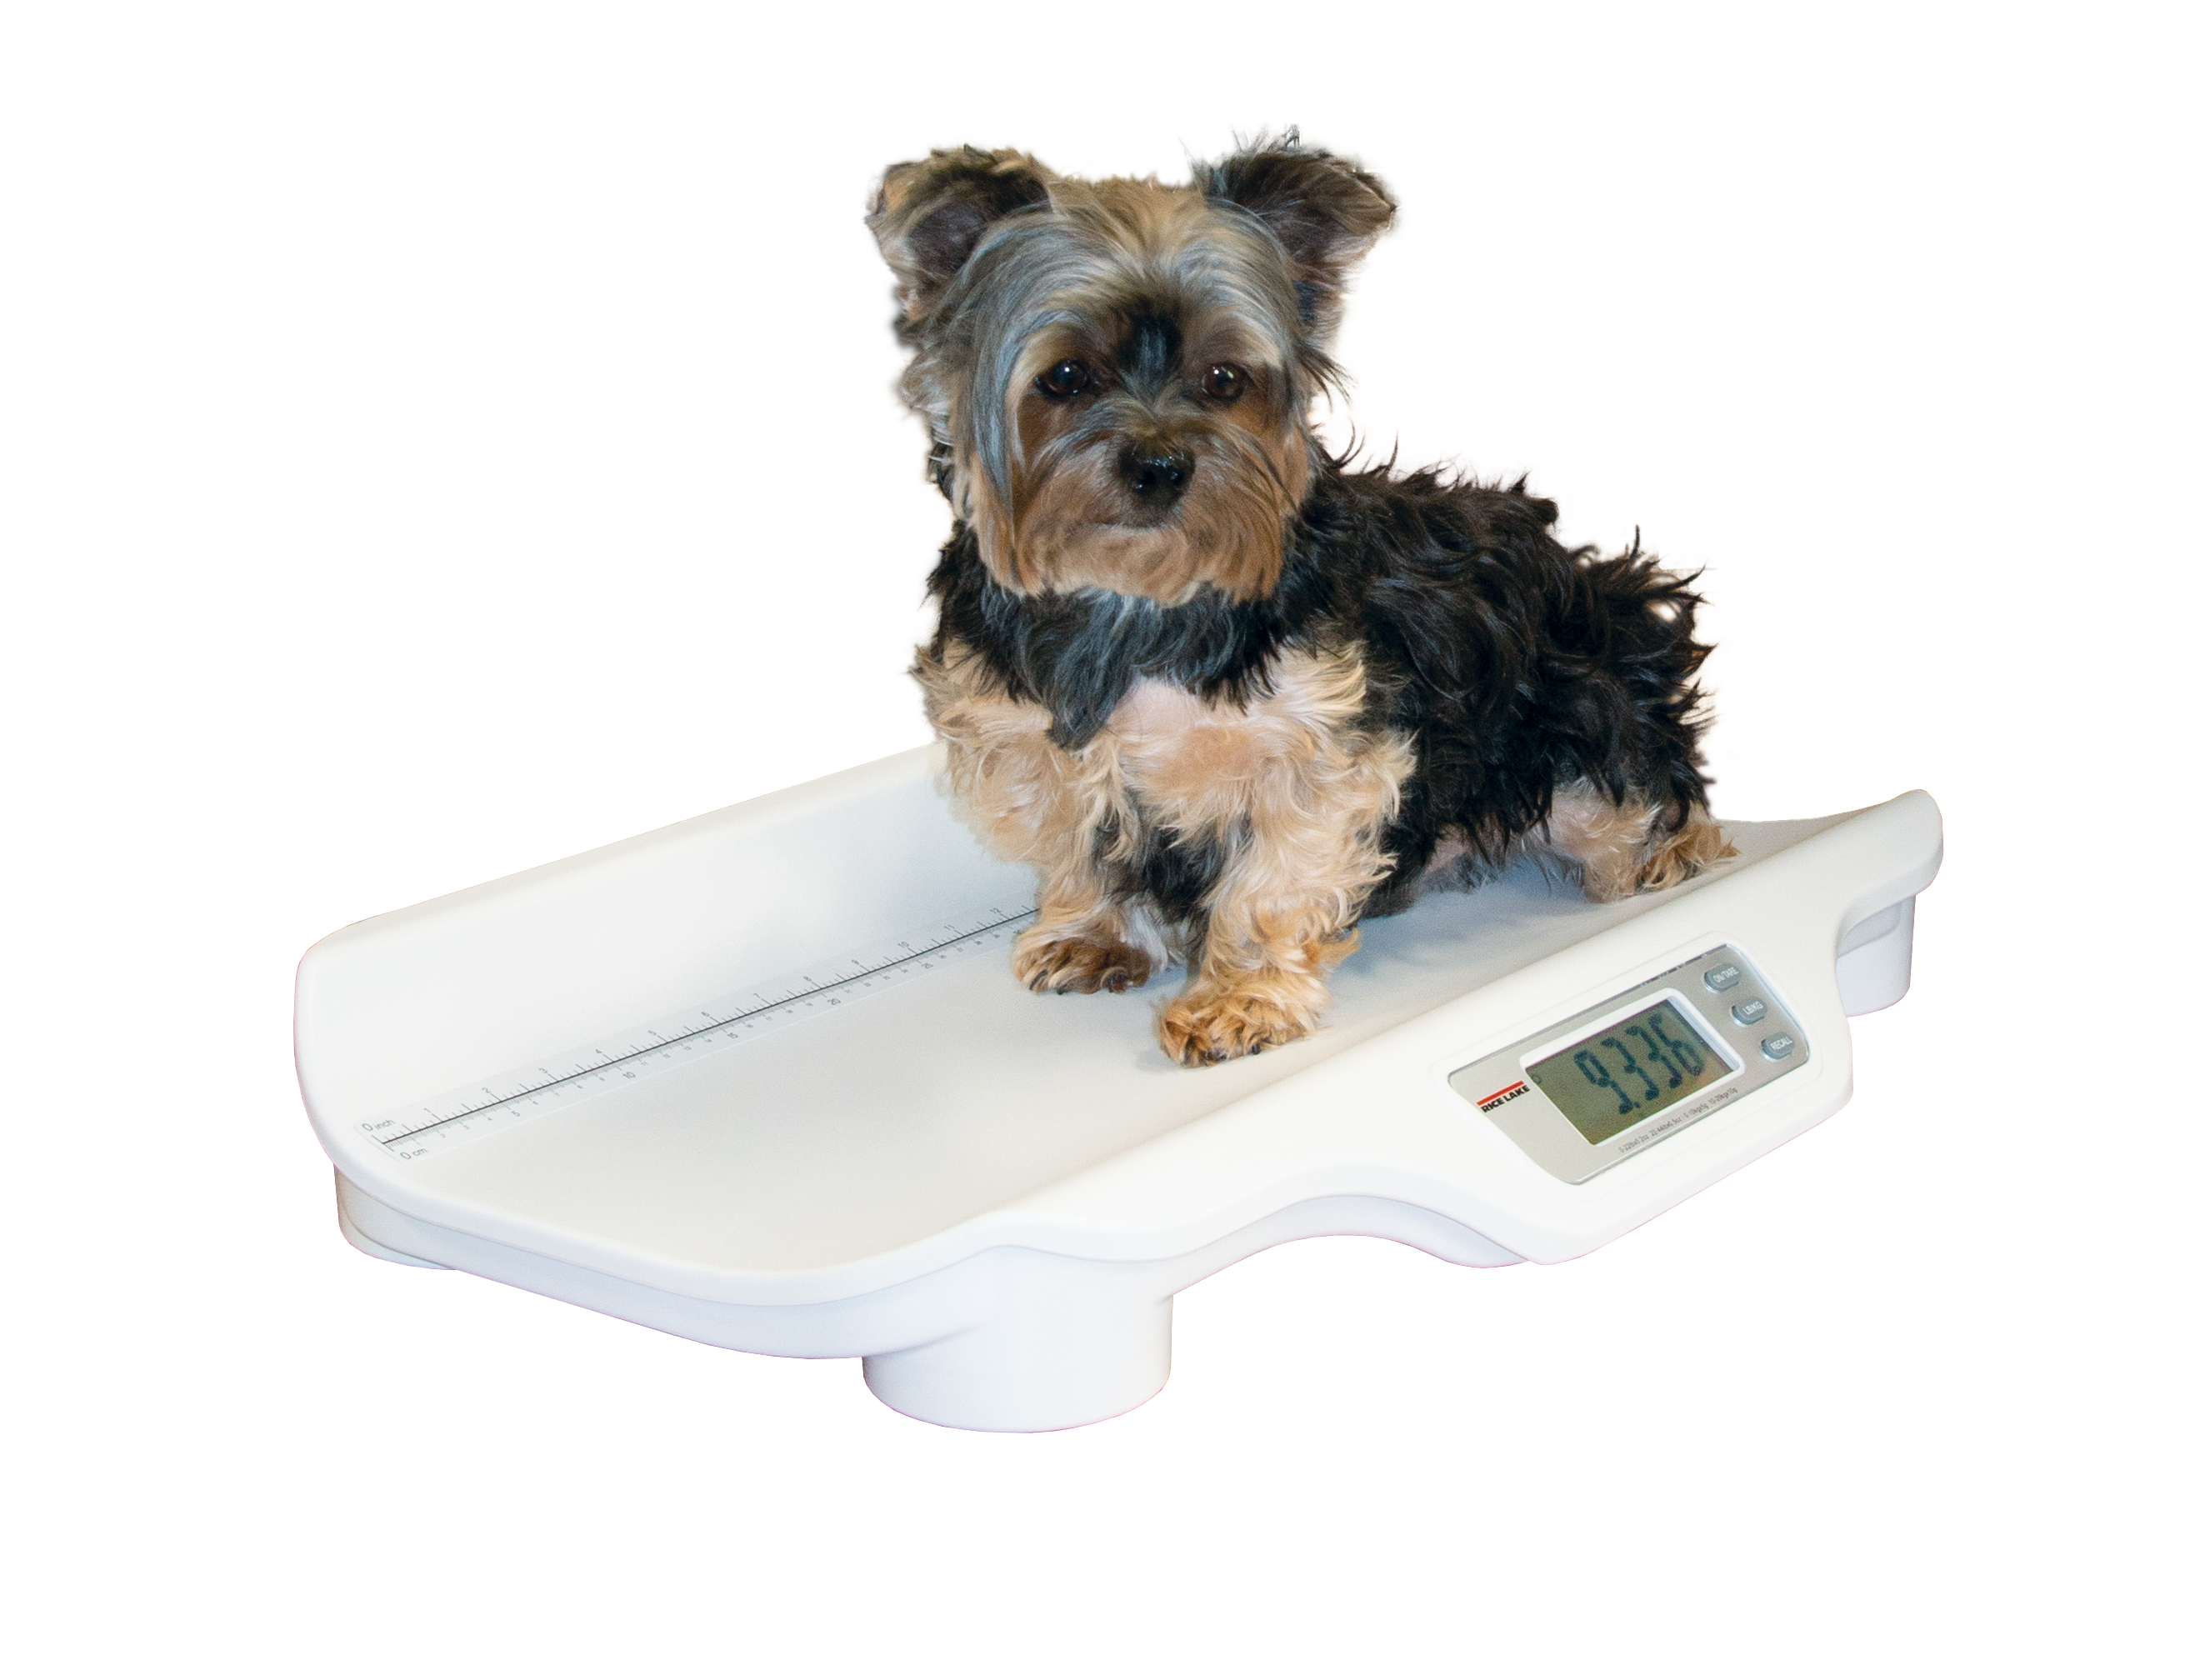 10kg Digital Pet Scale to Measure Weigh New Born Puppy Kitten White US